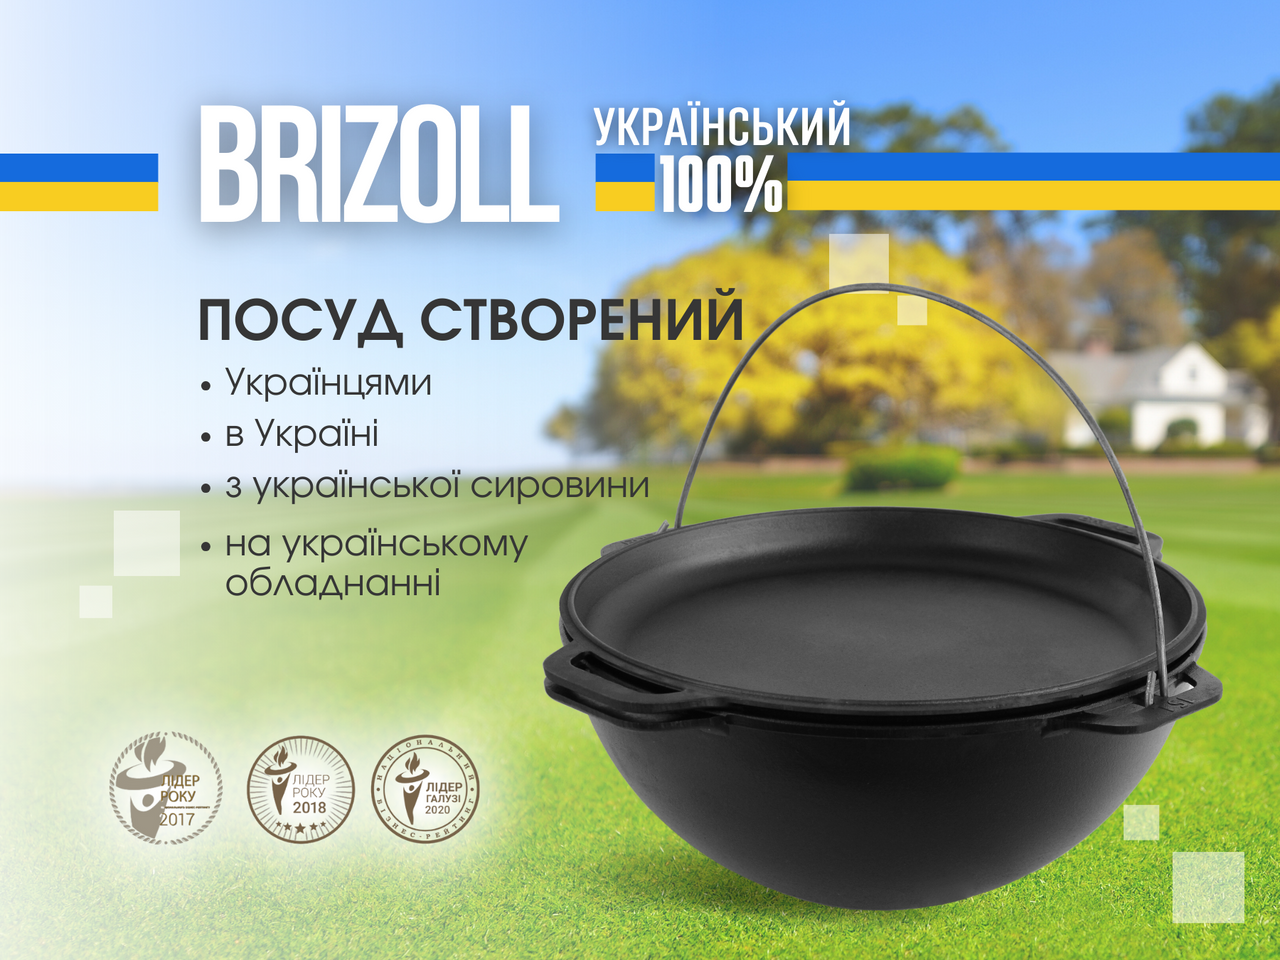 Cast iron asian cauldron 15 L WITH A LID-FRYING PAN, a bag and a stand